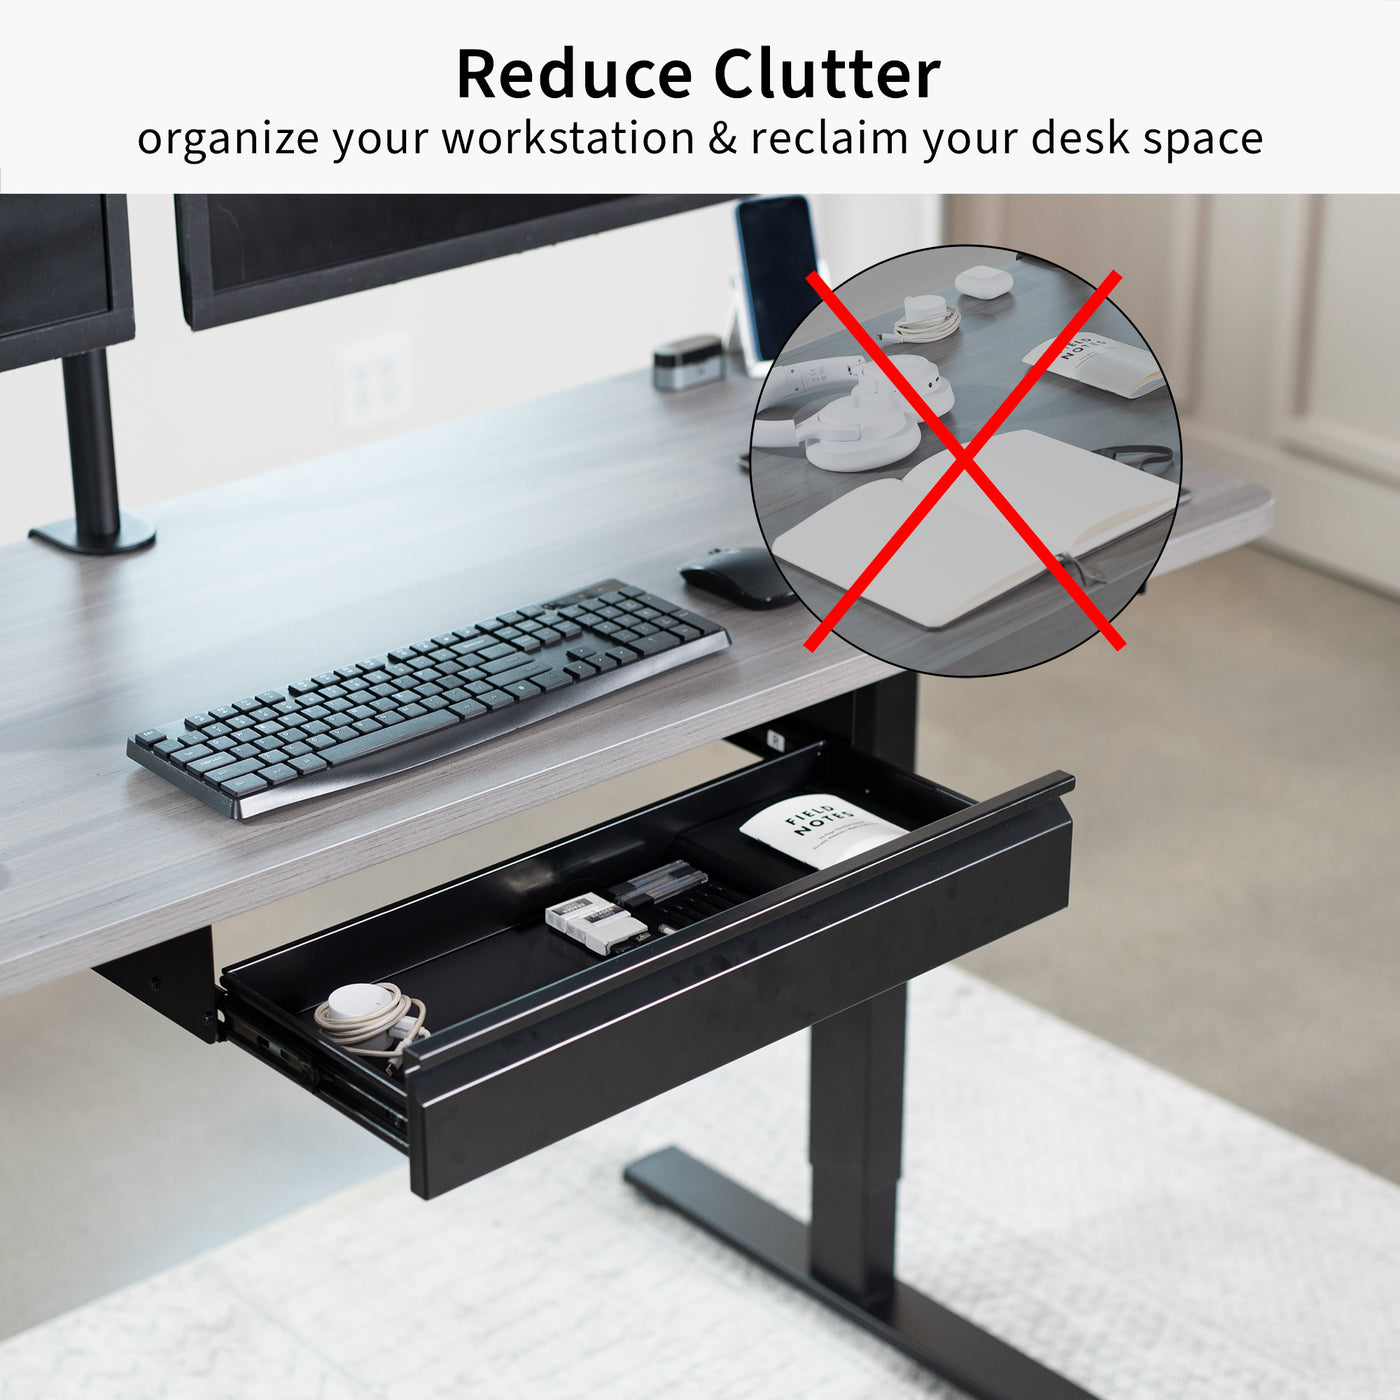 How do I get these desk drawers open? : r/fixit